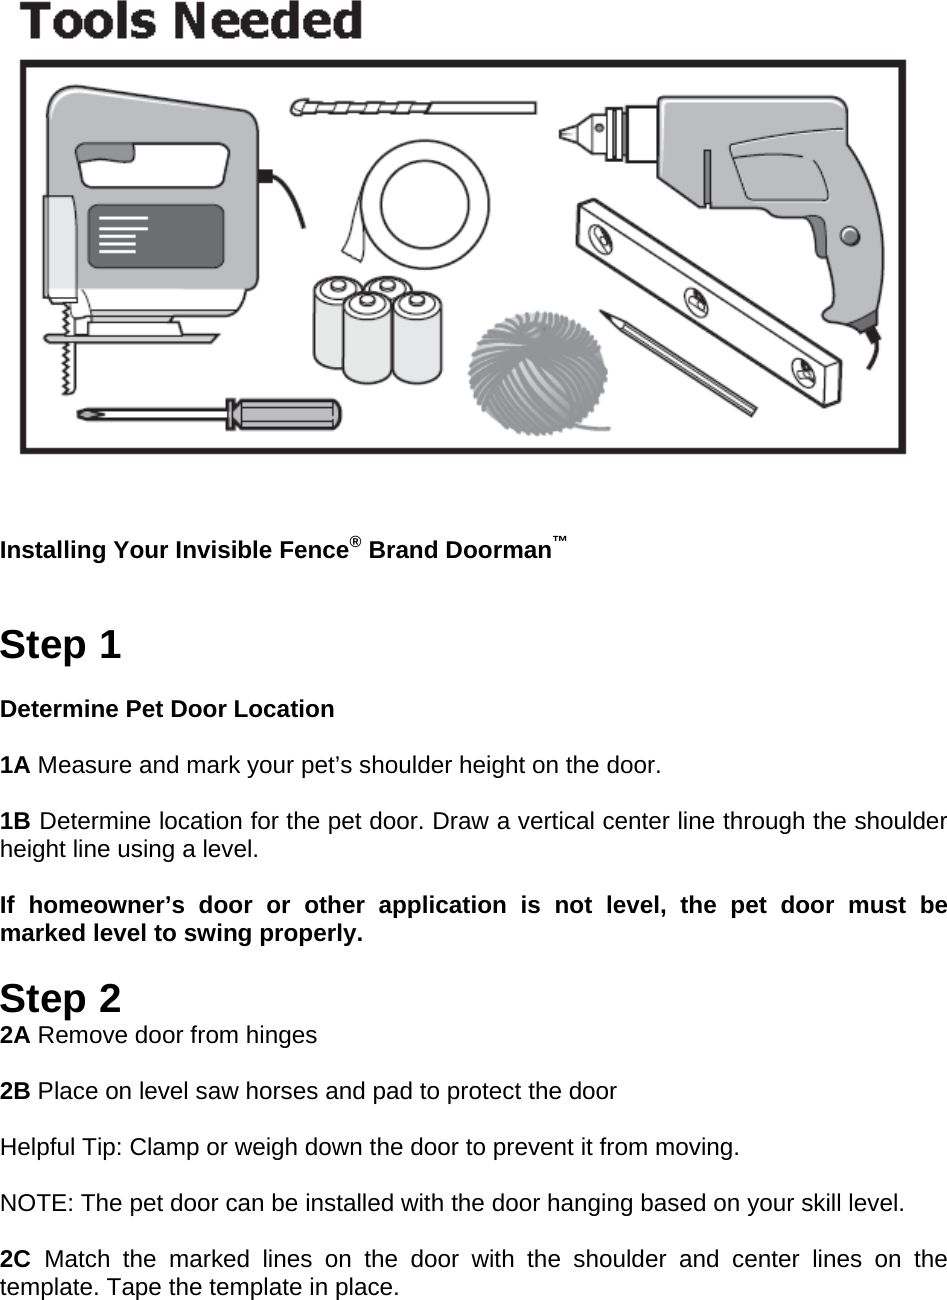    Installing Your Invisible Fence® Brand Doorman™   Step 1  Determine Pet Door Location 1A 1B 1A Measure and mark your pet’s shoulder height on the door.  1B Determine location for the pet door. Draw a vertical center line through the shoulder height line using a level. NOTICE If homeowner’s door or other application is not level, the pet door must be marked level to swing properly.  Step 2 2A Remove door from hinges  2B Place on level saw horses and pad to protect the door  Helpful Tip: Clamp or weigh down the door to prevent it from moving.  NOTE: The pet door can be installed with the door hanging based on your skill level.  2C  Match the marked lines on the door with the shoulder and center lines on the template. Tape the template in place. 